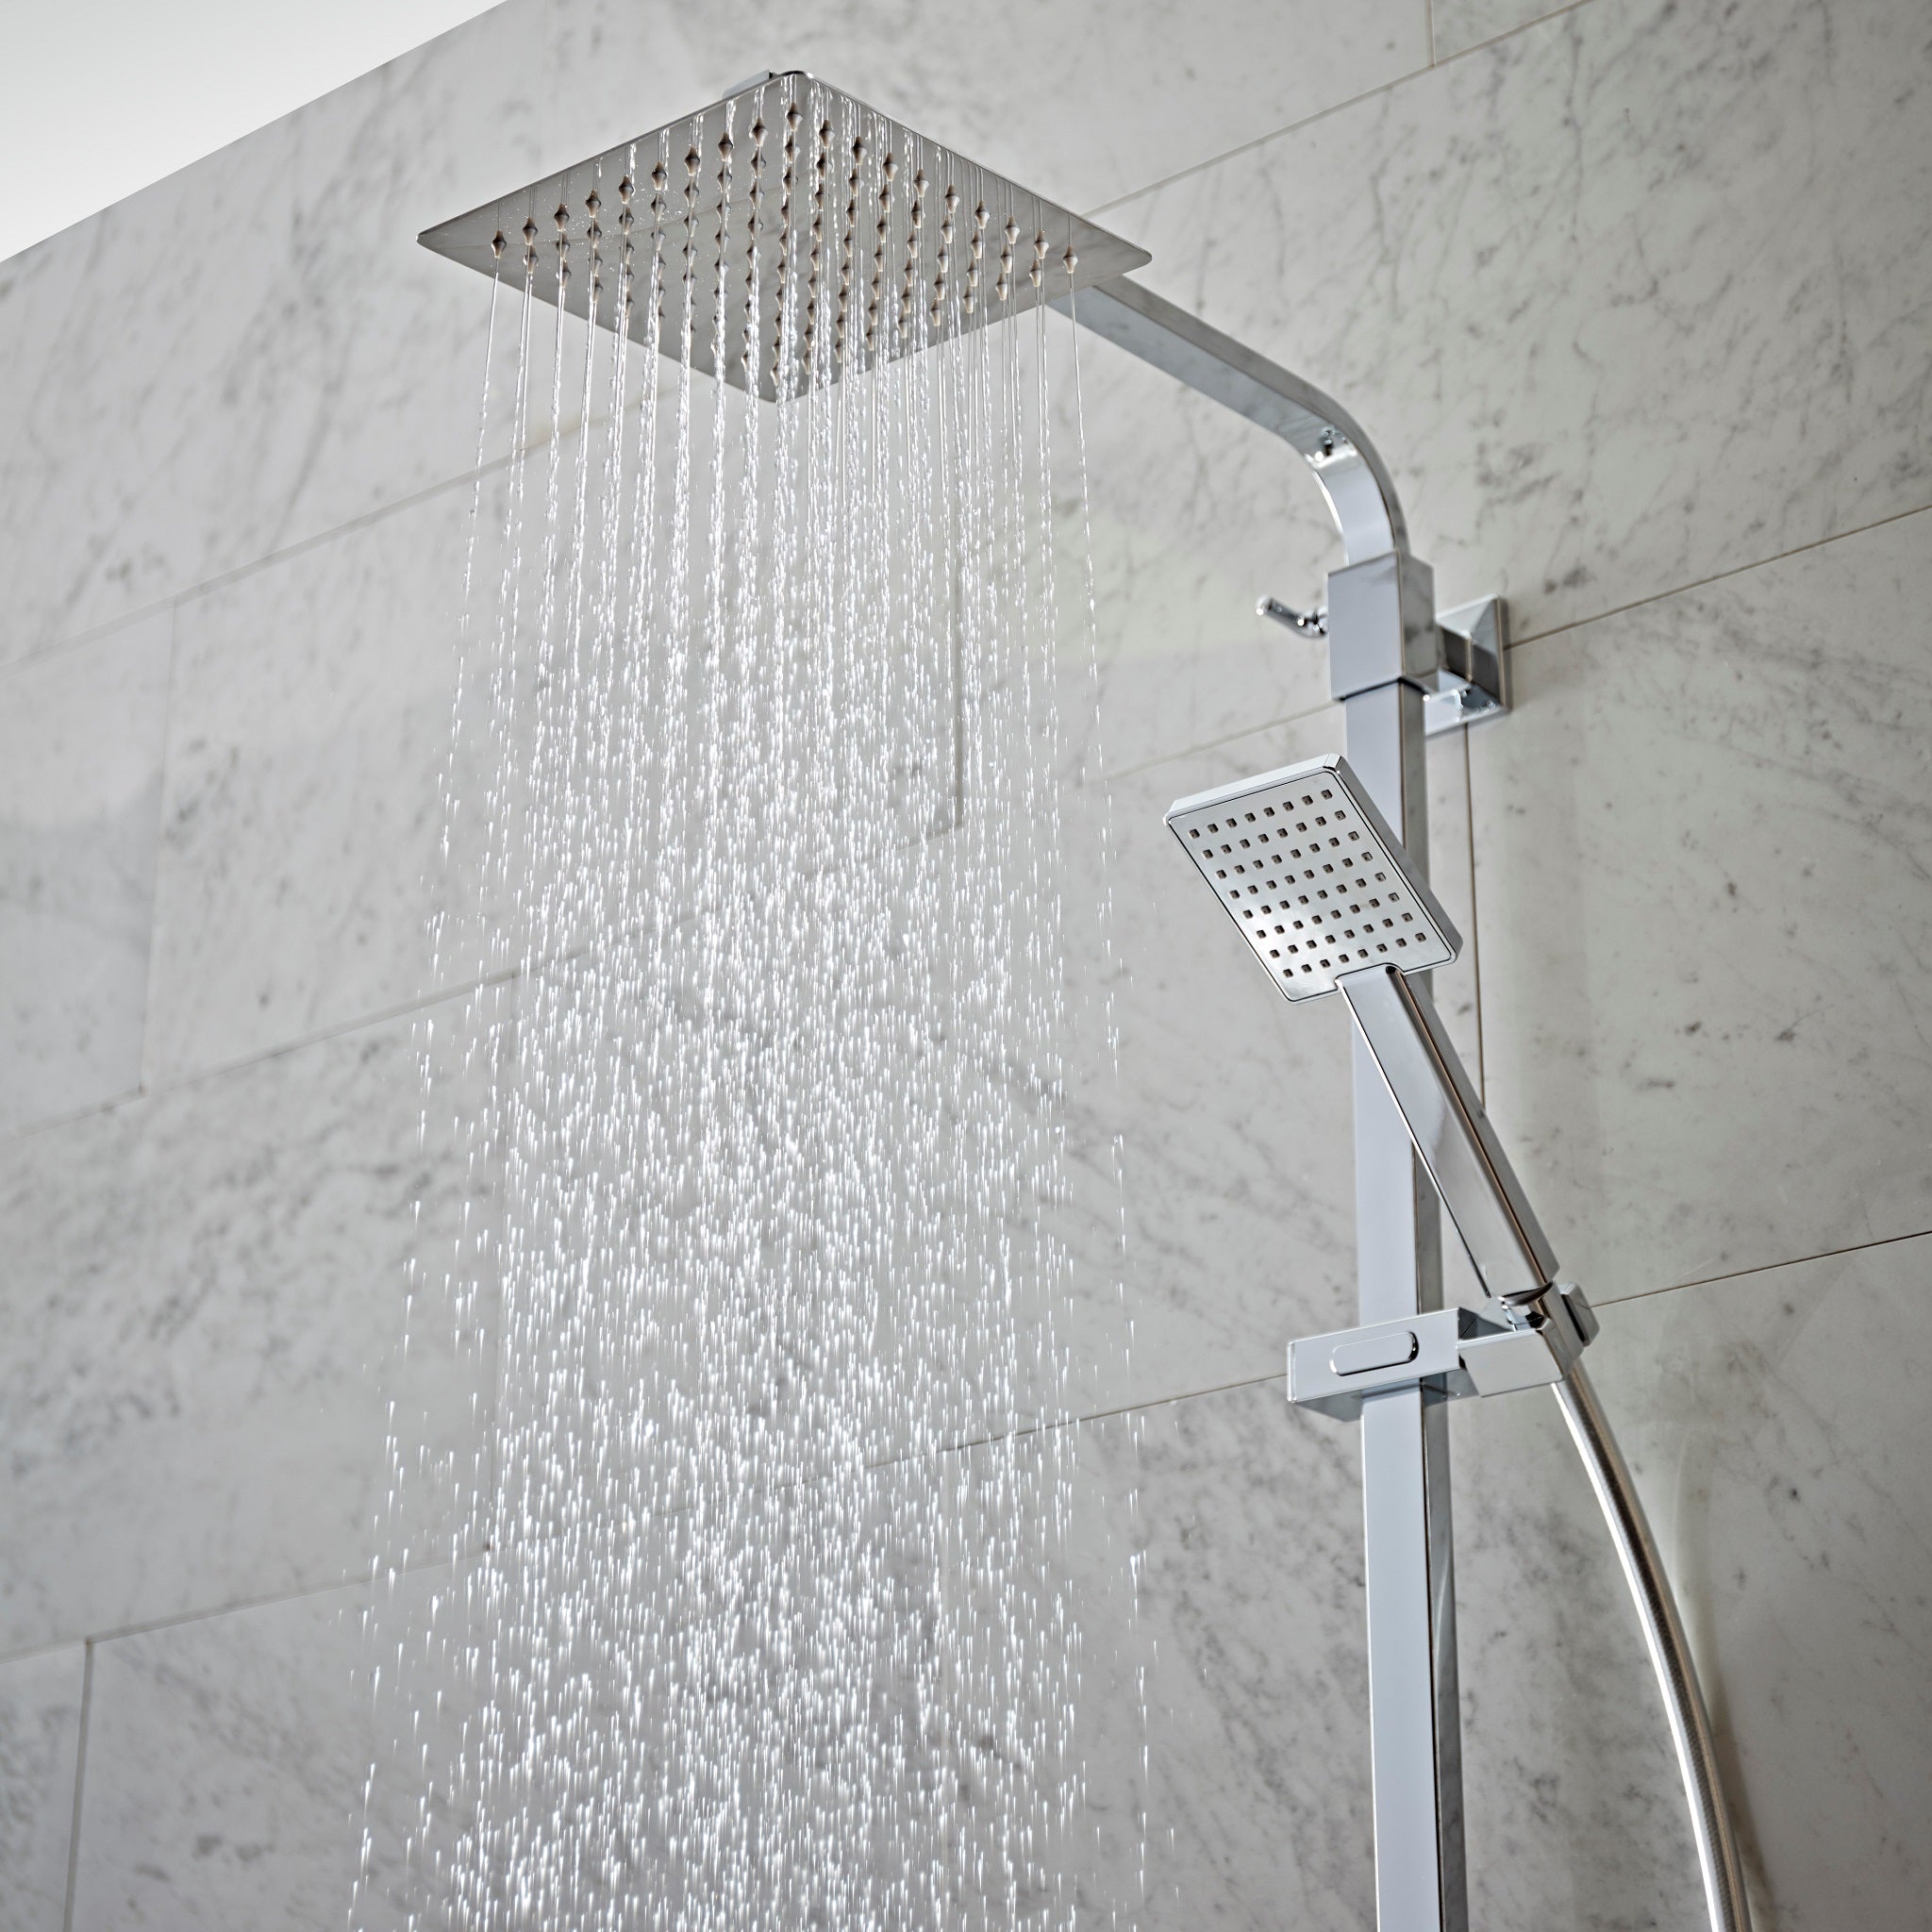 Tavistock Index Dual Function Concealed Shower System With Head And Riser Kit close up view of shower heads against light grey tiling SND1610